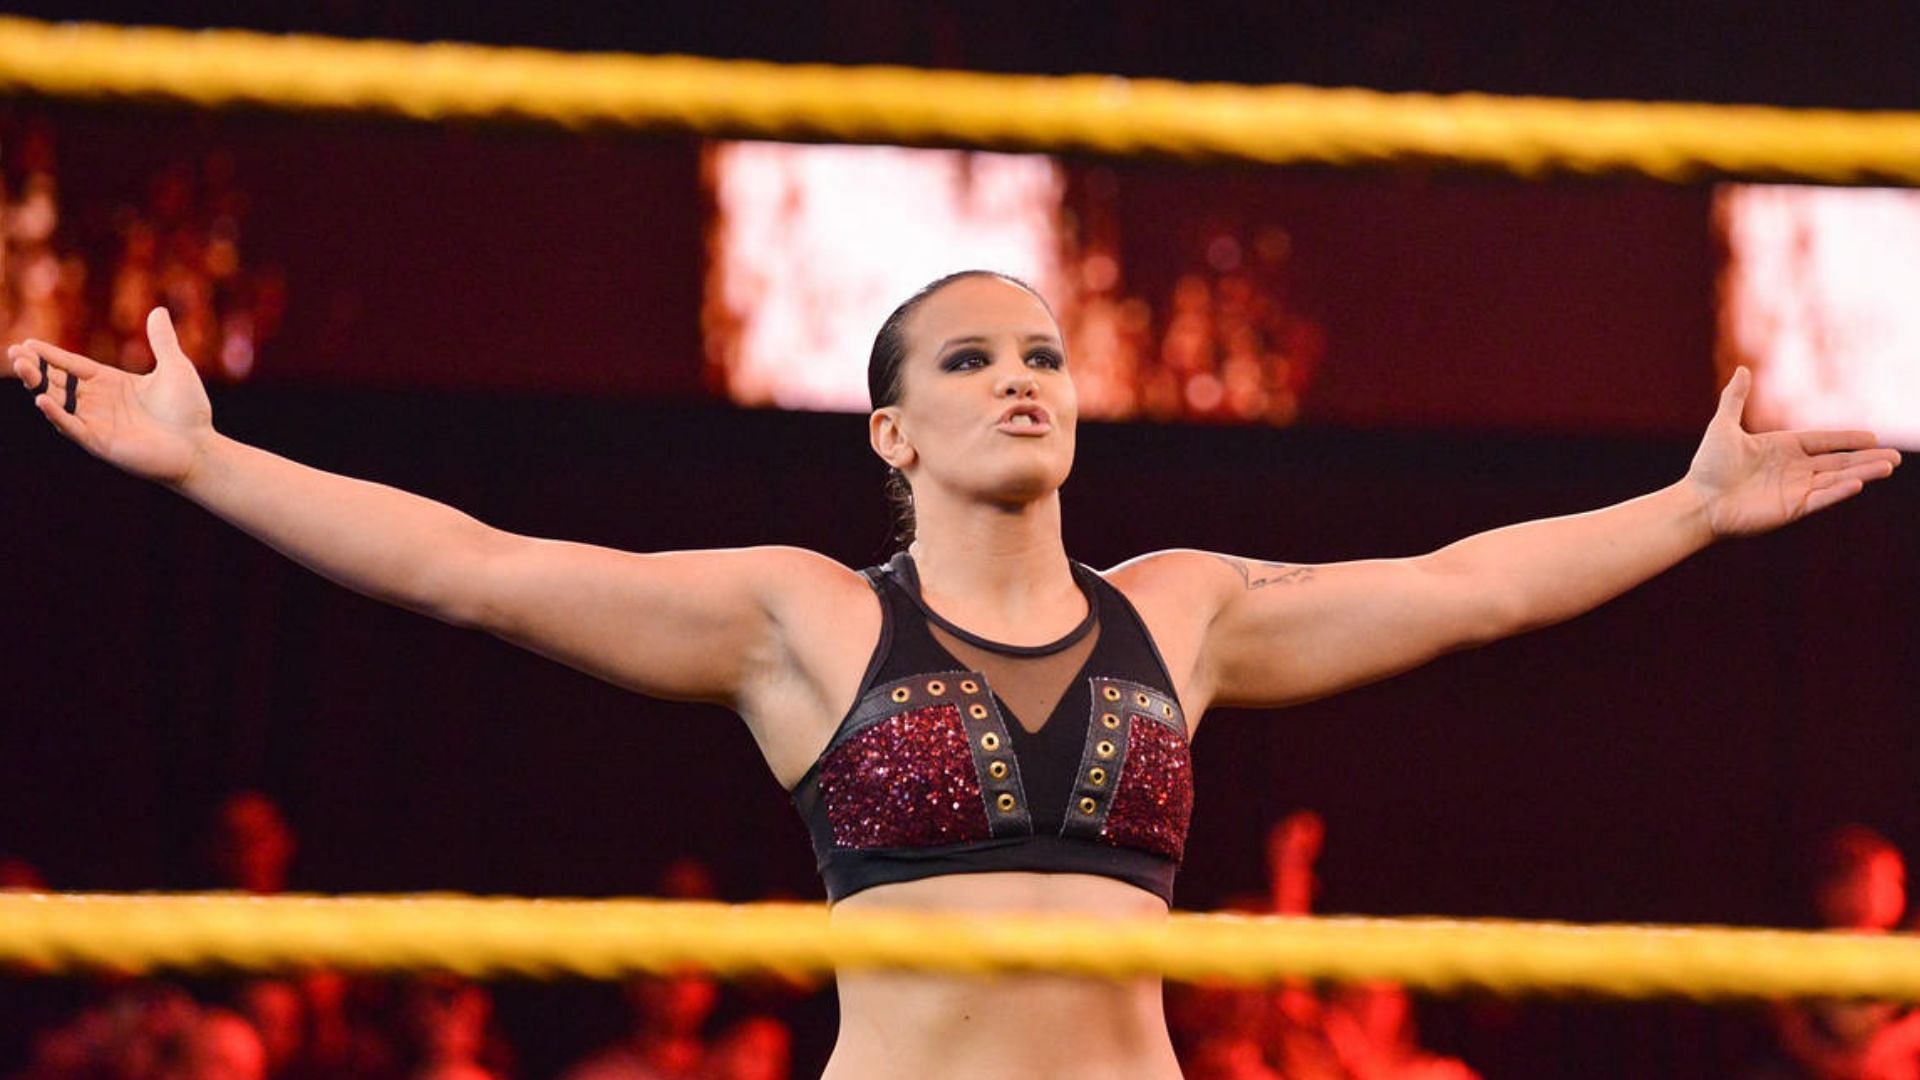 Shayna Baszler is a two-time NXT Women